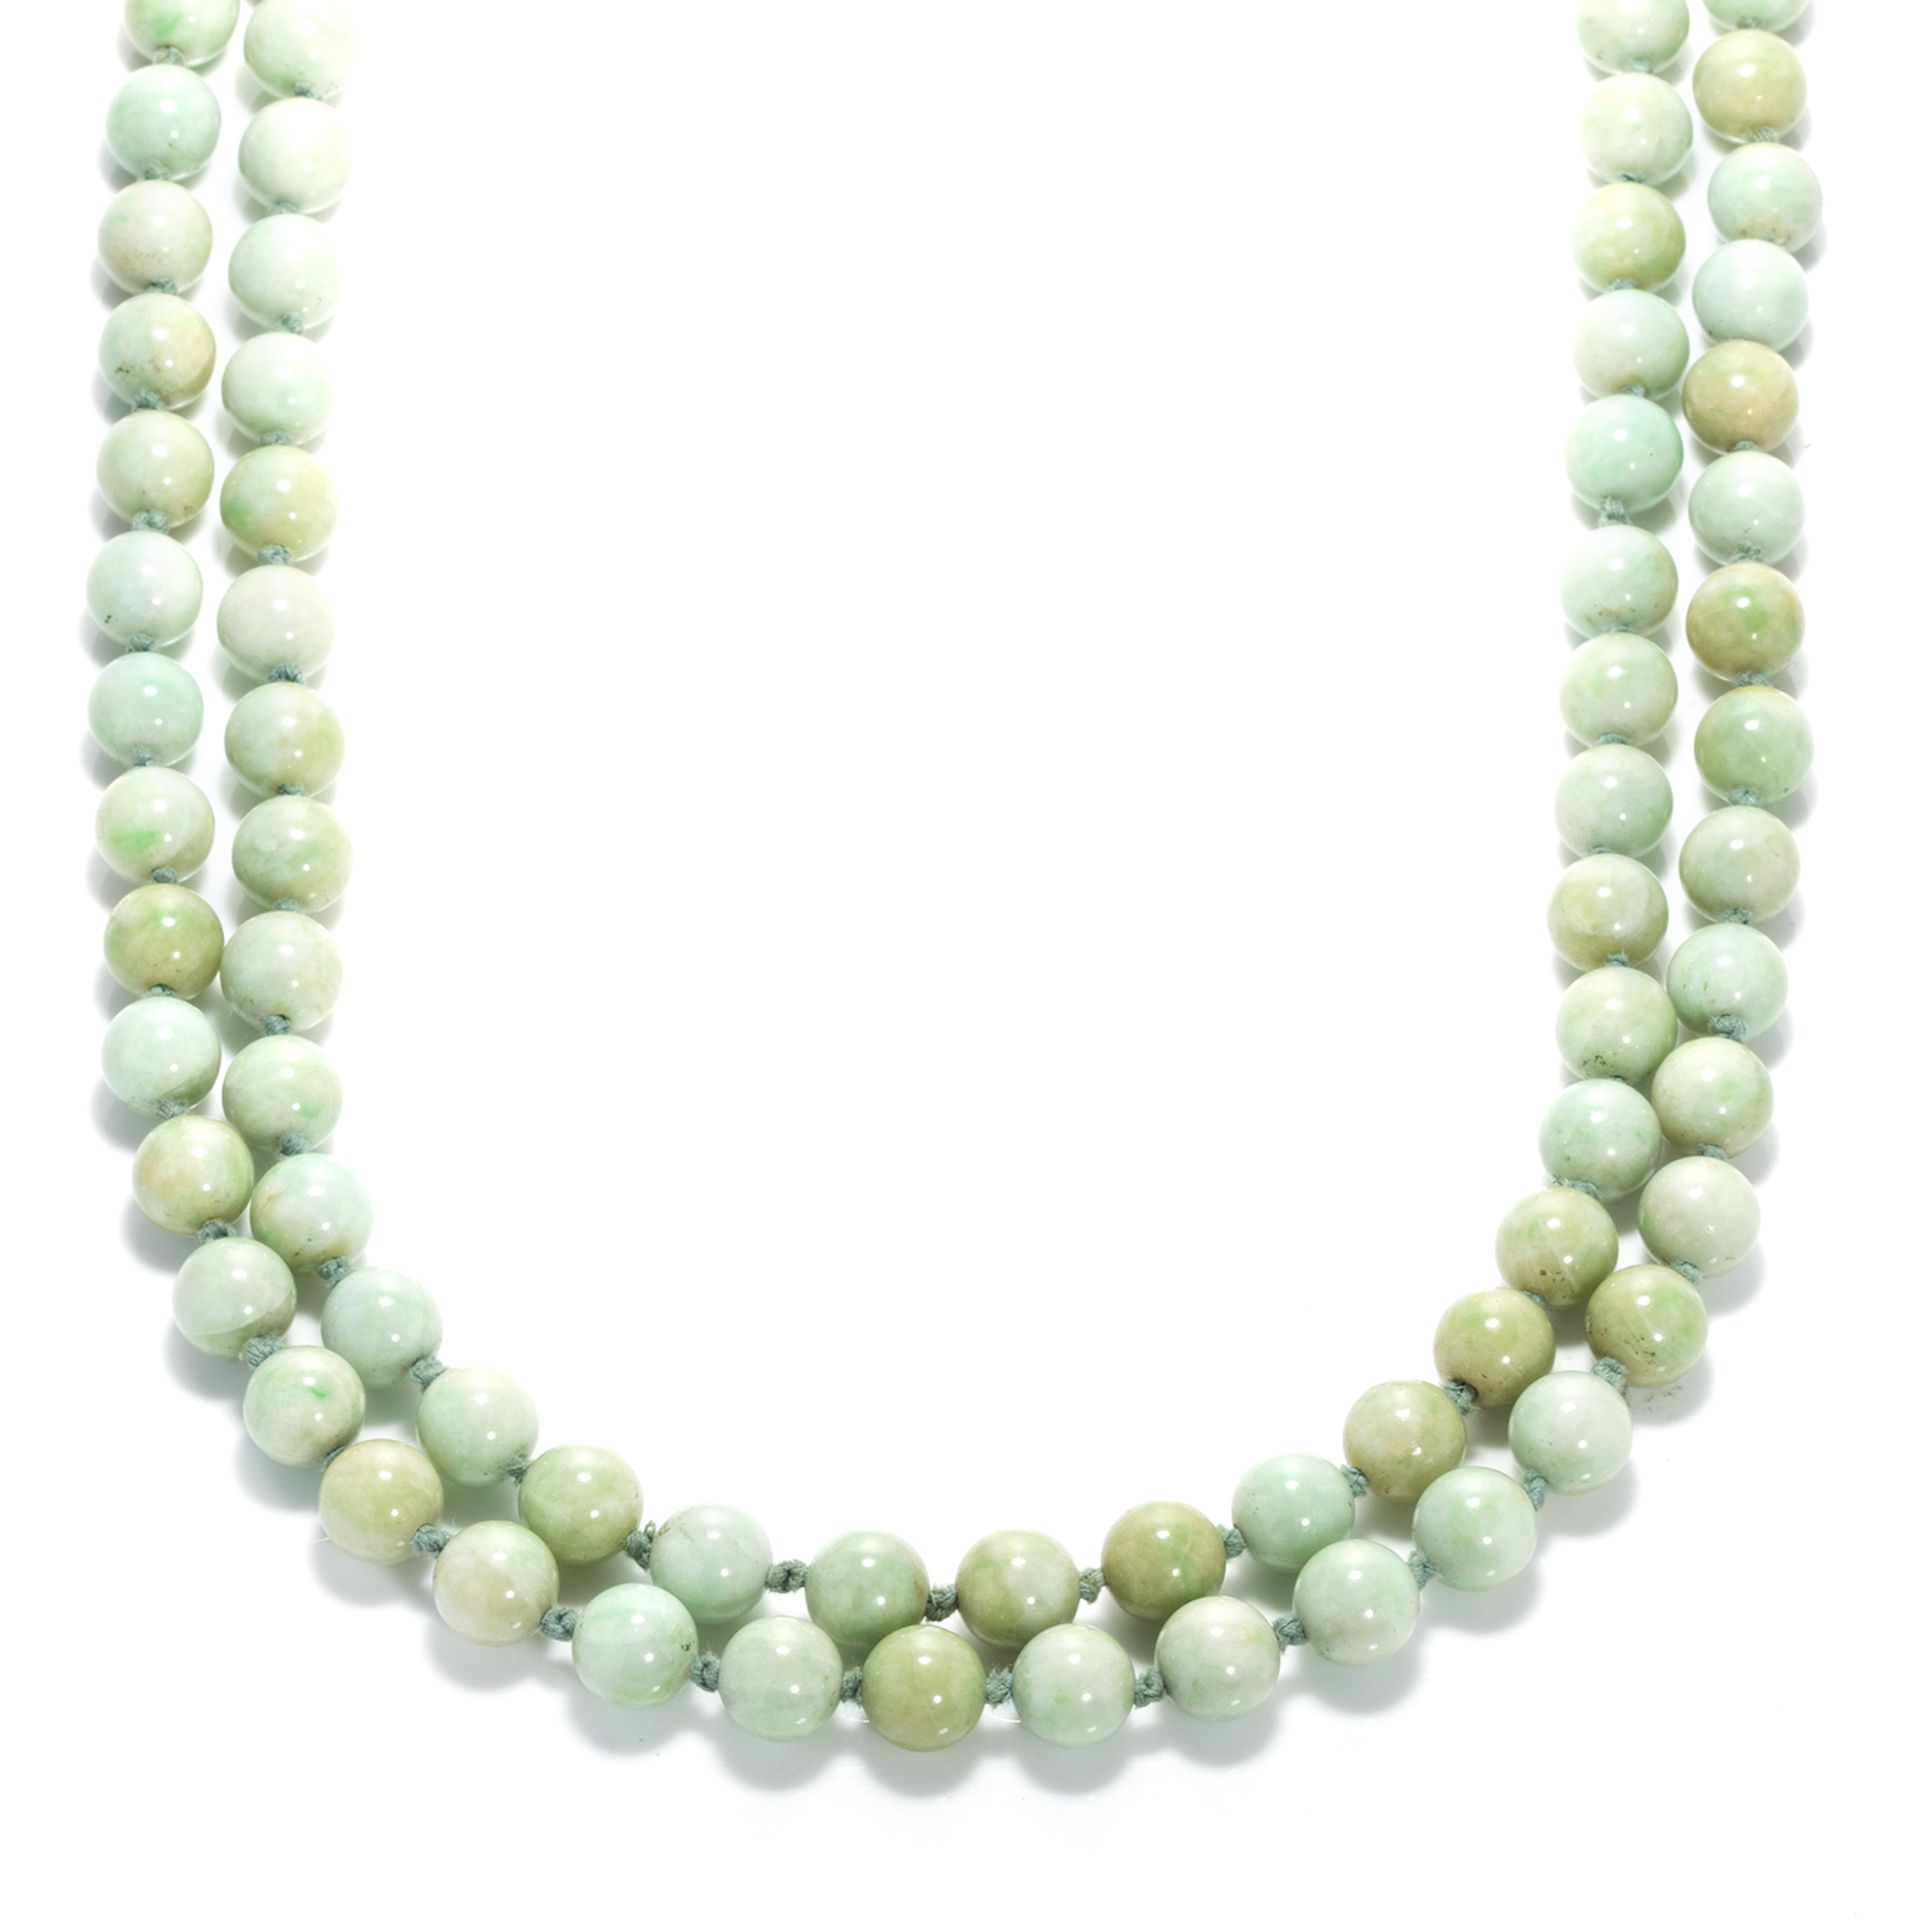 A JADEITE JADE BEAD NECKLACE comprising a single row of one hundred and three polished round jade